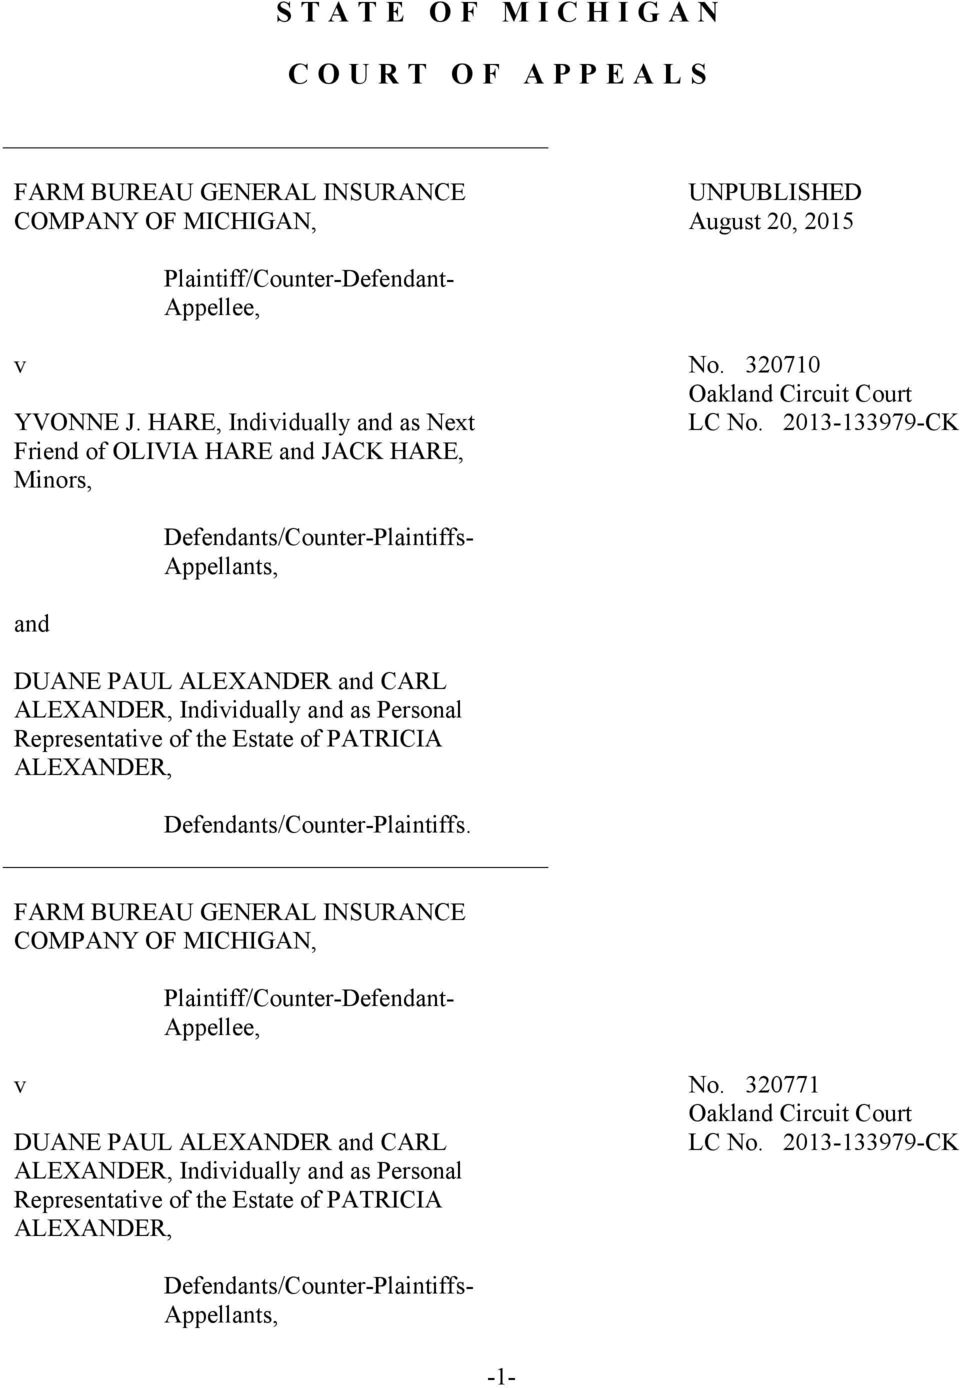 2013-133979-CK Friend of OLIVIA HARE and JACK HARE, Minors, and Defendants/Counter-Plaintiffs- Appellants, DUANE PAUL ALEXANDER and CARL ALEXANDER, Individually and as Personal Representative of the